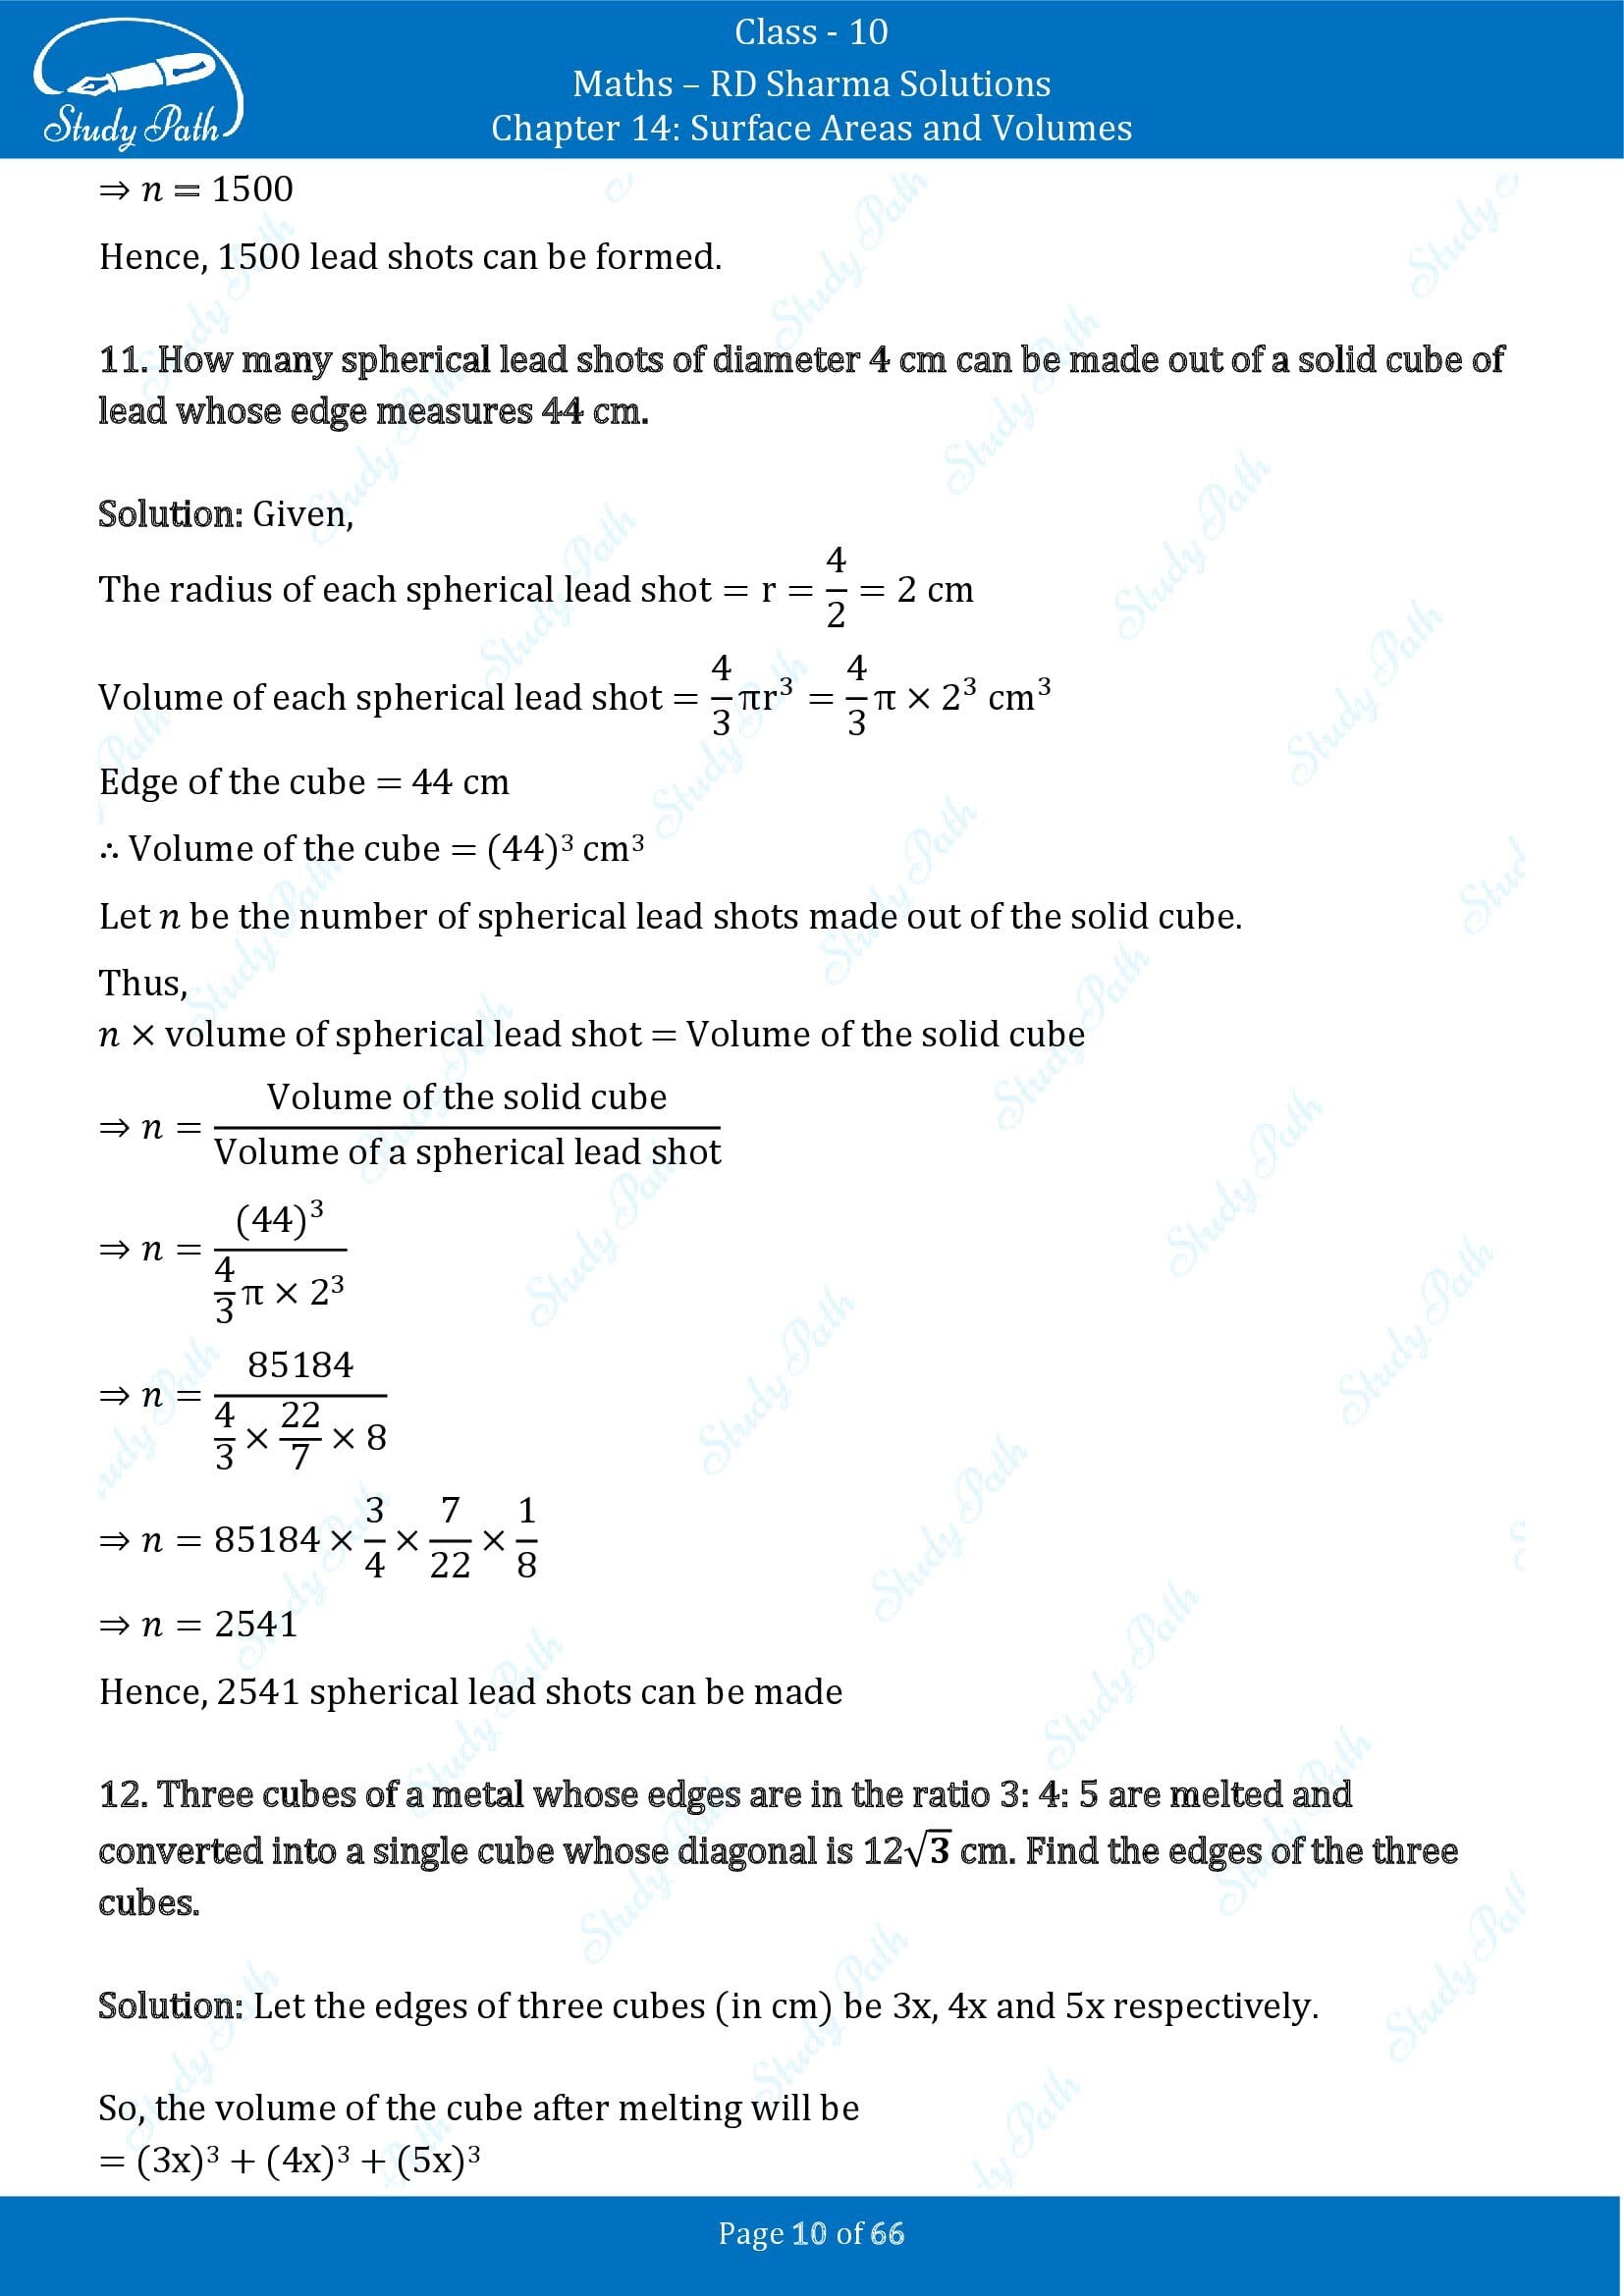 RD Sharma Solutions Class 10 Chapter 14 Surface Areas and Volumes Exercise 14.1 00010